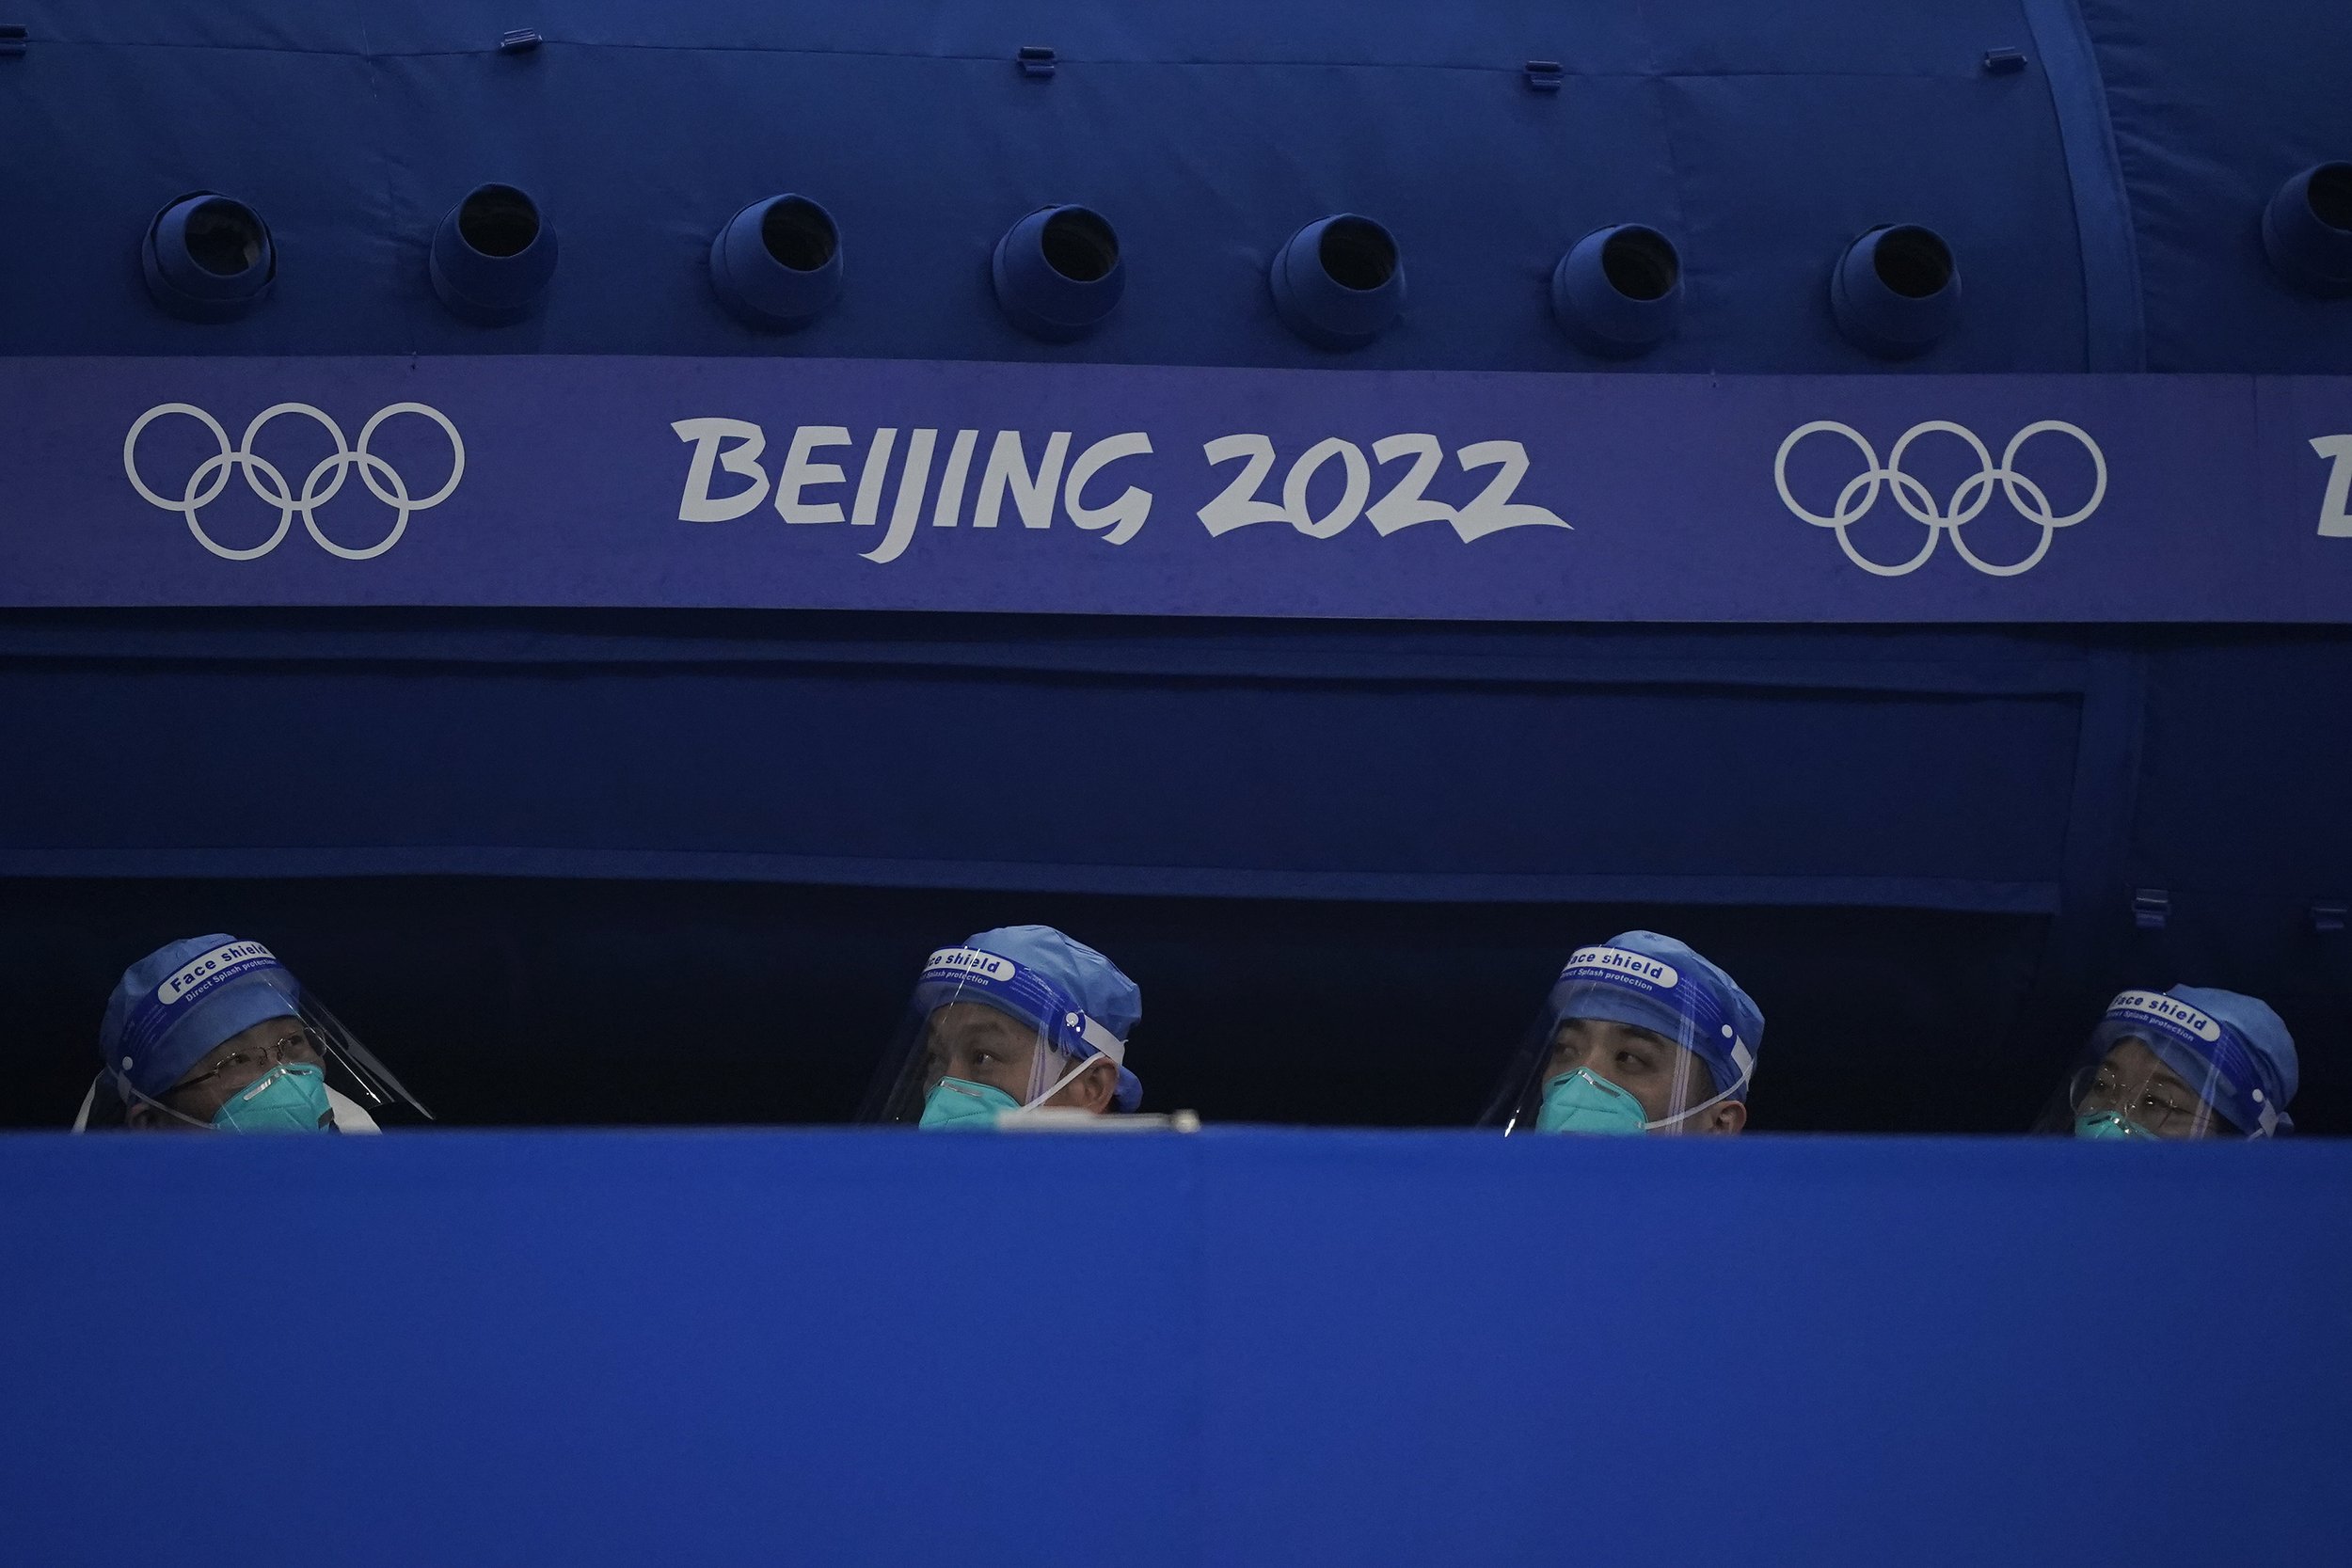  A group of medical staff sits in the curling arena during the mixed doubles curling match at the Beijing Winter Olympics Sunday, Feb. 6, 2022, in Beijing. (AP Photo/Brynn Anderson) 